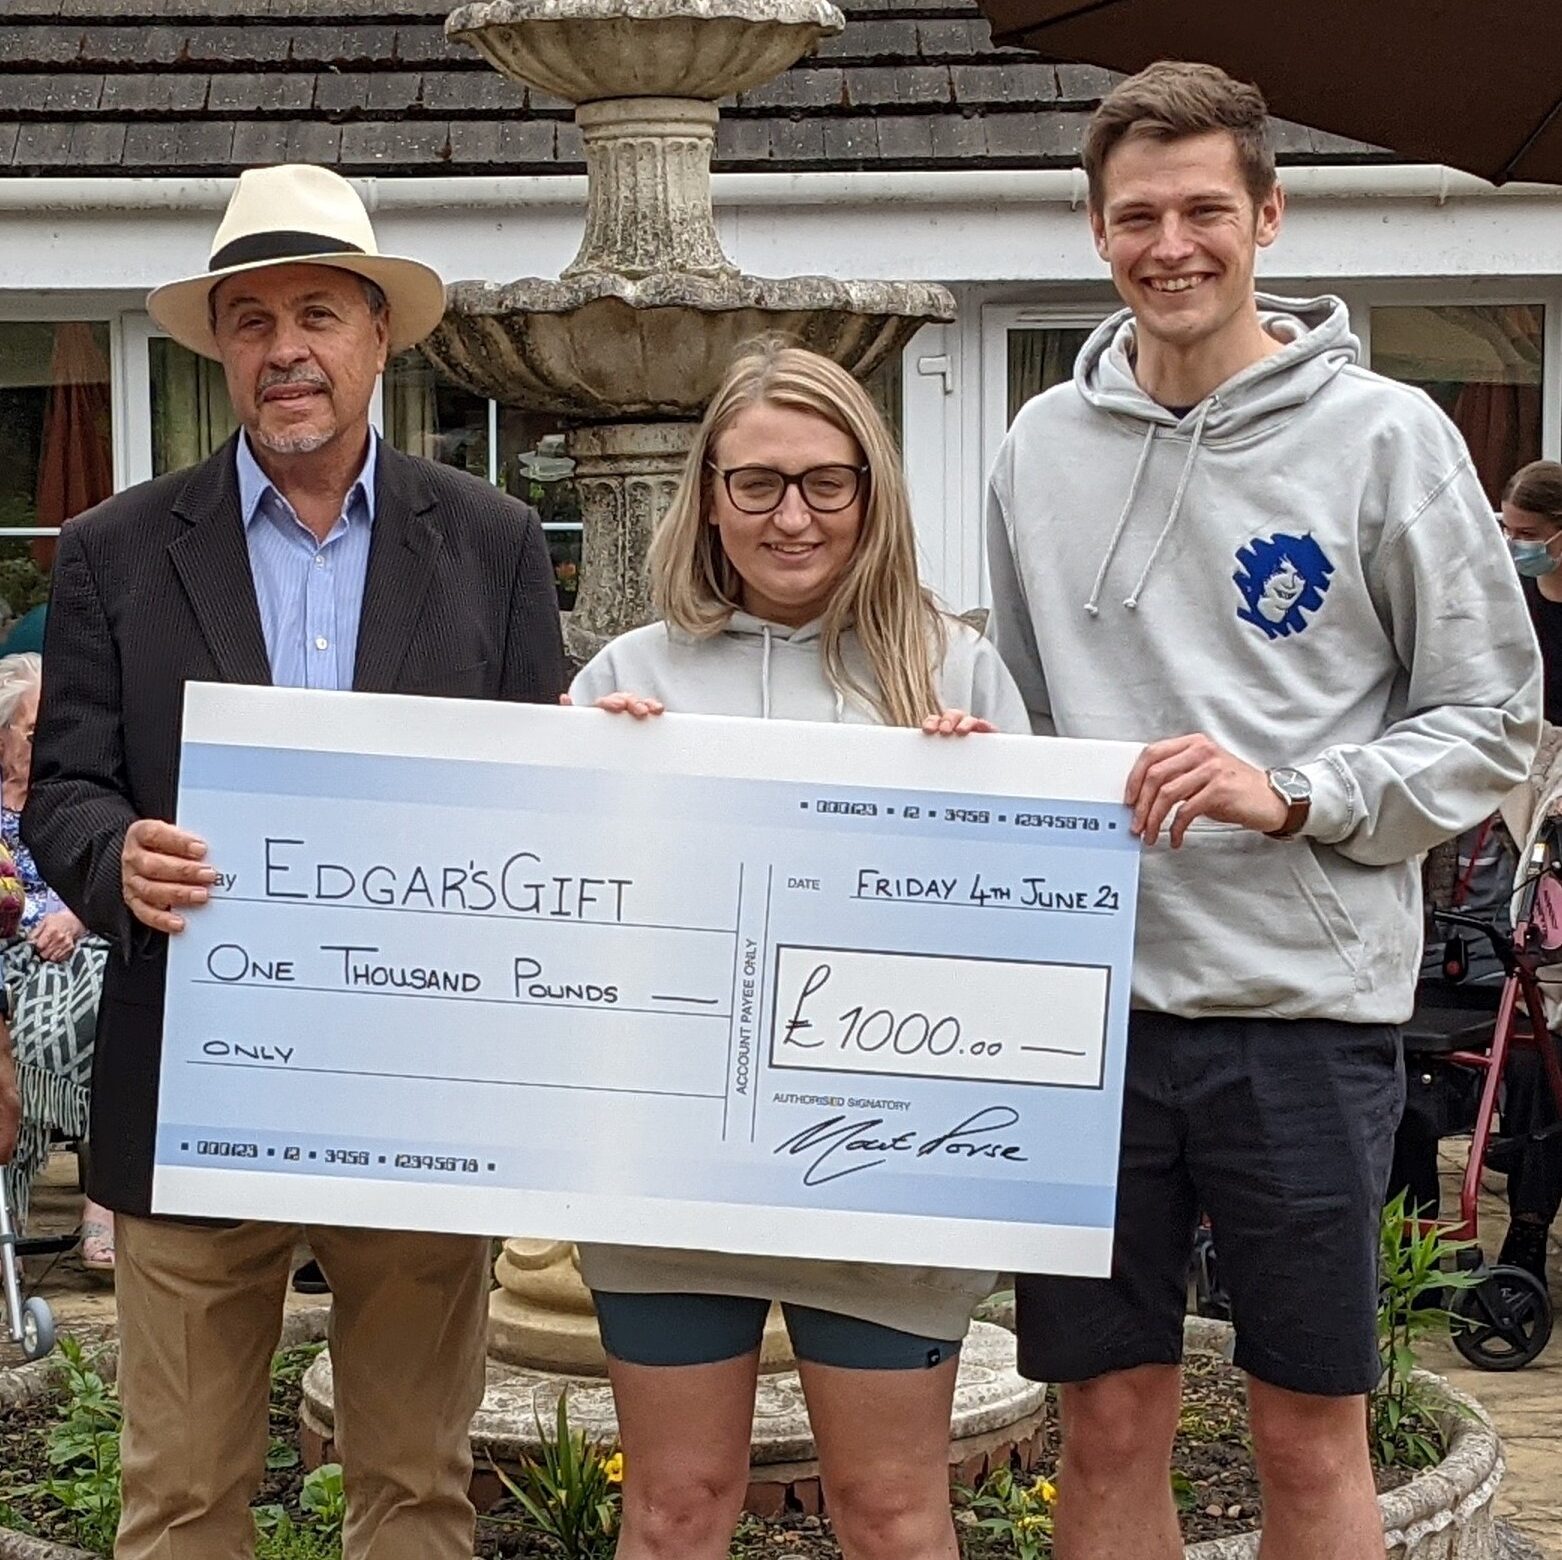 Moat House care home proudly present a cheque to Edgar’s gift